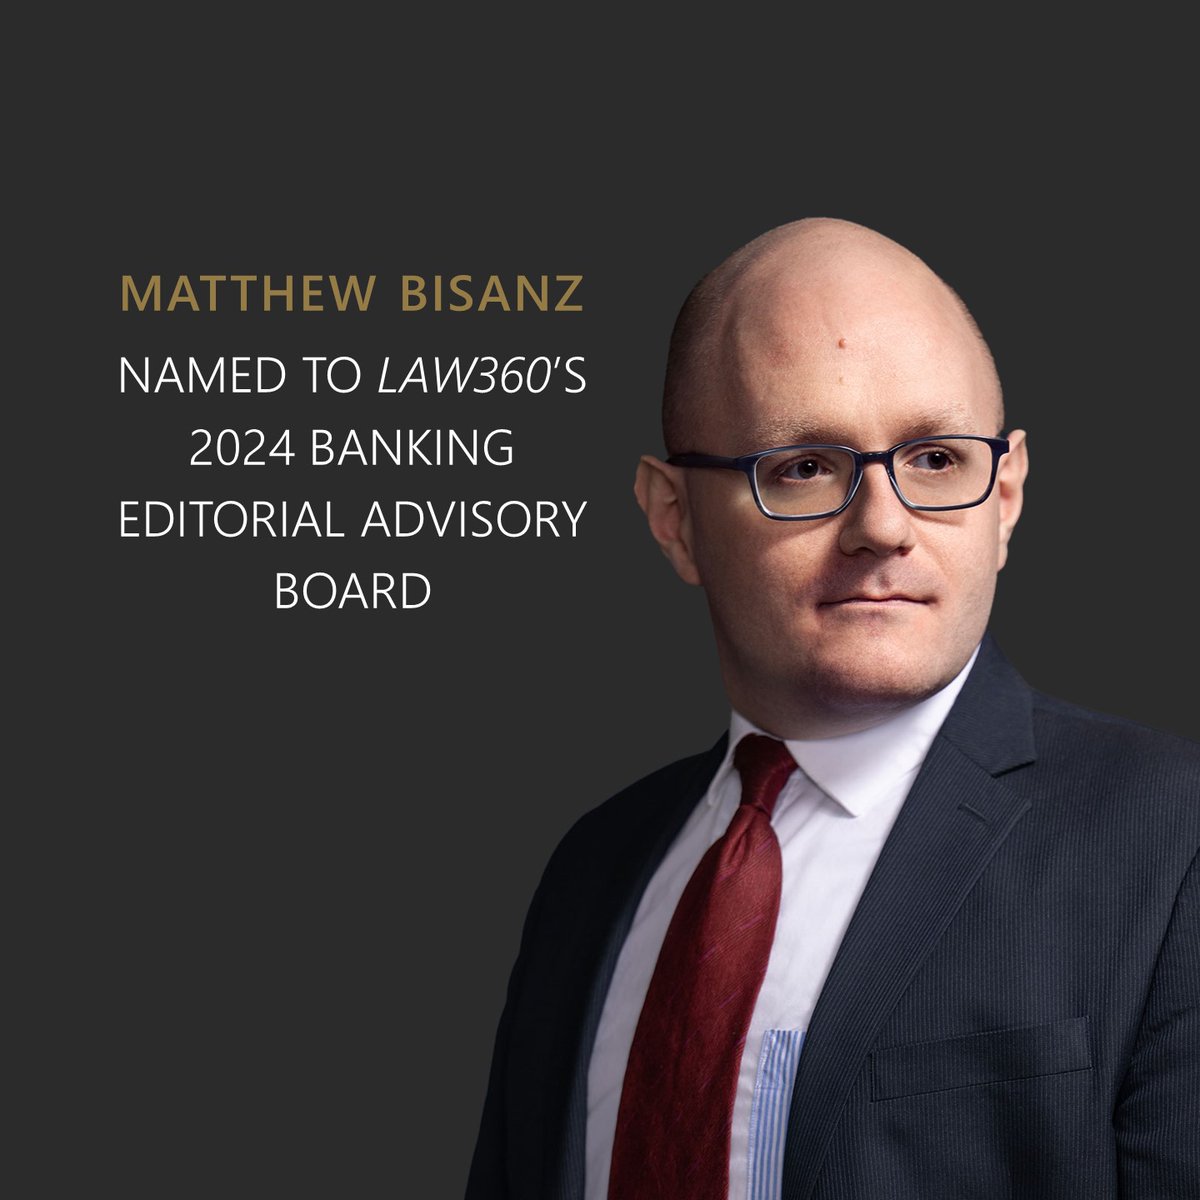 Matthew Bisanz, partner in our Financial Services Regulatory & Enforcement practice is named to @Law360's 2024 Editorial Advisory Board for Banking to provide feedback and insight on Law360's coverage and future coverage. law360.com/cybersecurity-… #banking #lawyers #legalnews